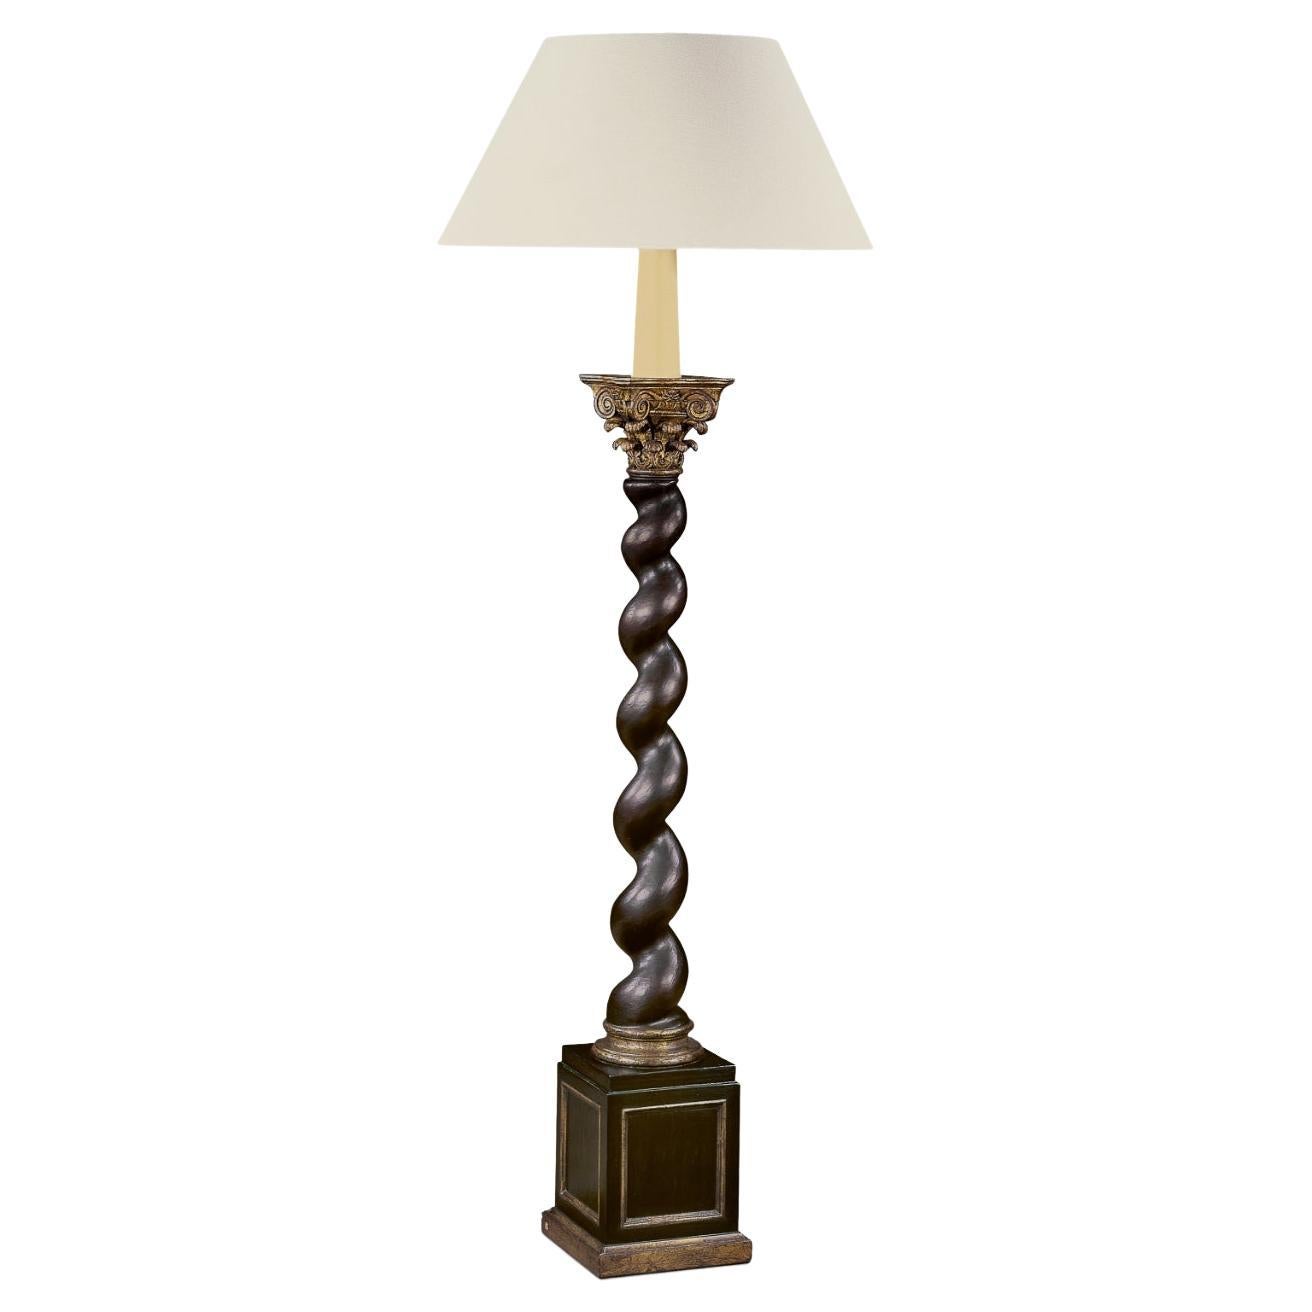 Salomonic Twist Lamp Inspired by Columns with Twisted Shaft & Corinthian Capital For Sale